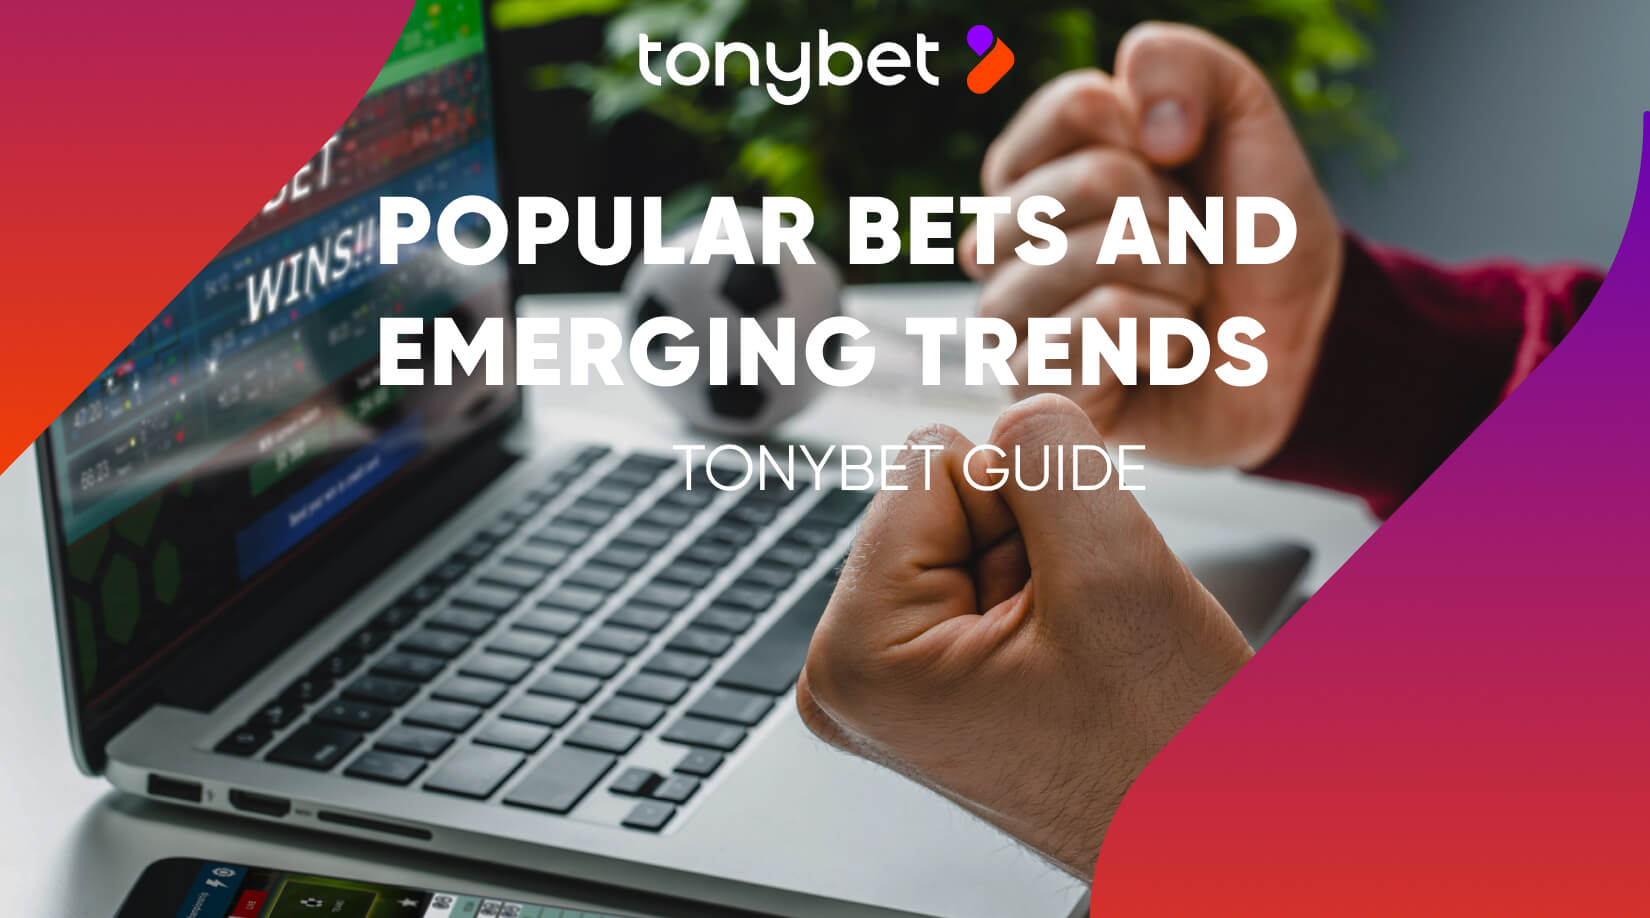 Popular Bets and Emerging Trends: The Bettor’s Guide on Tonybet